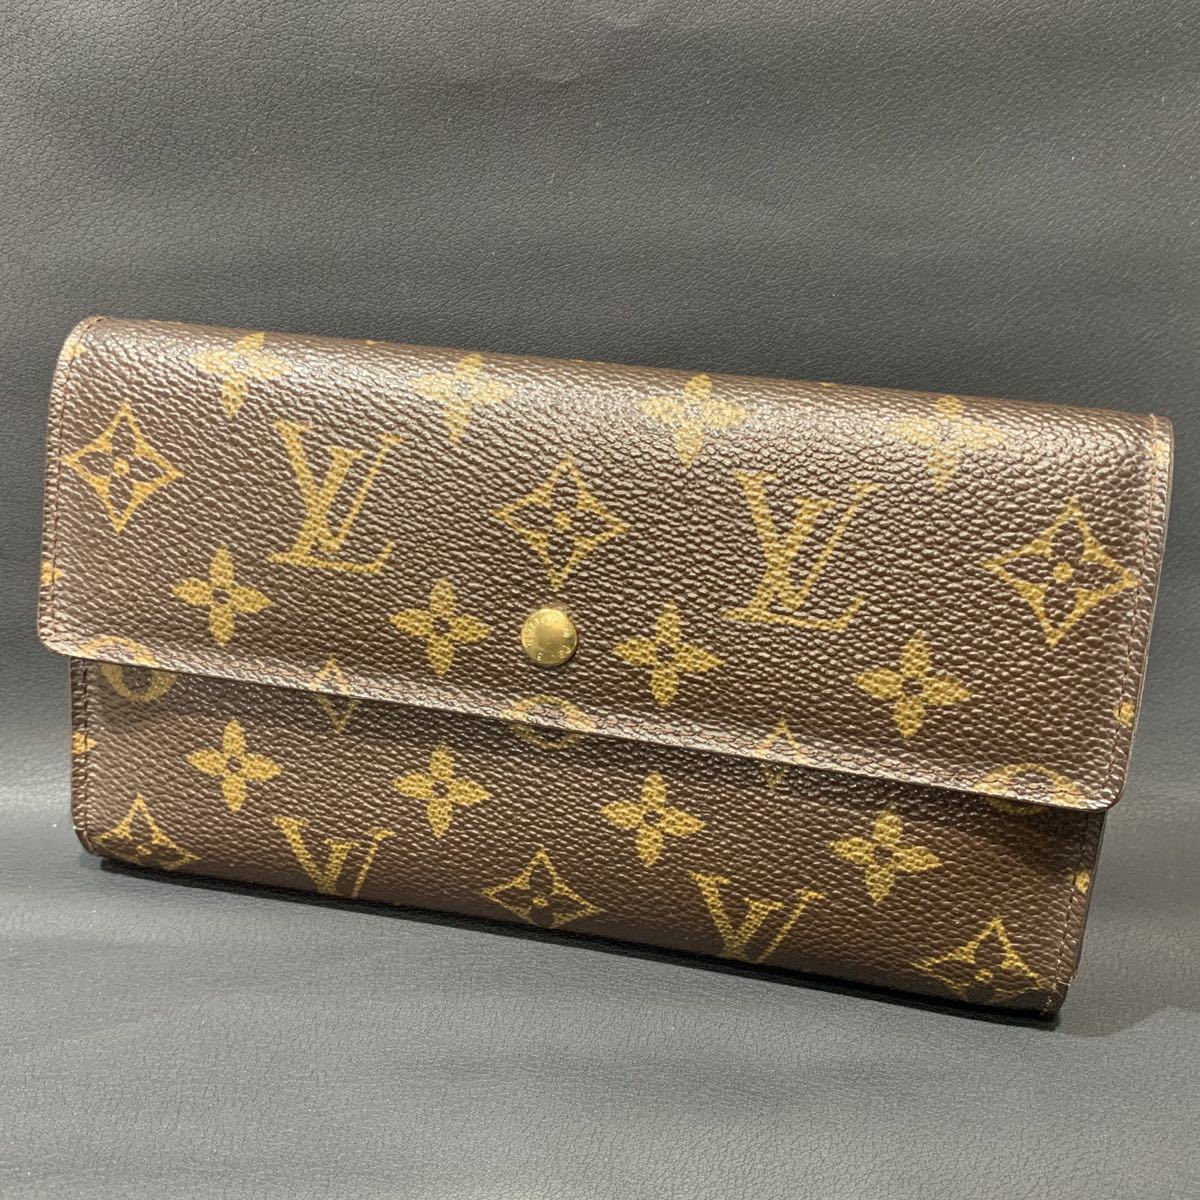 USED] LOUIS VUITTON ルイヴィトン ポルトトレゾール